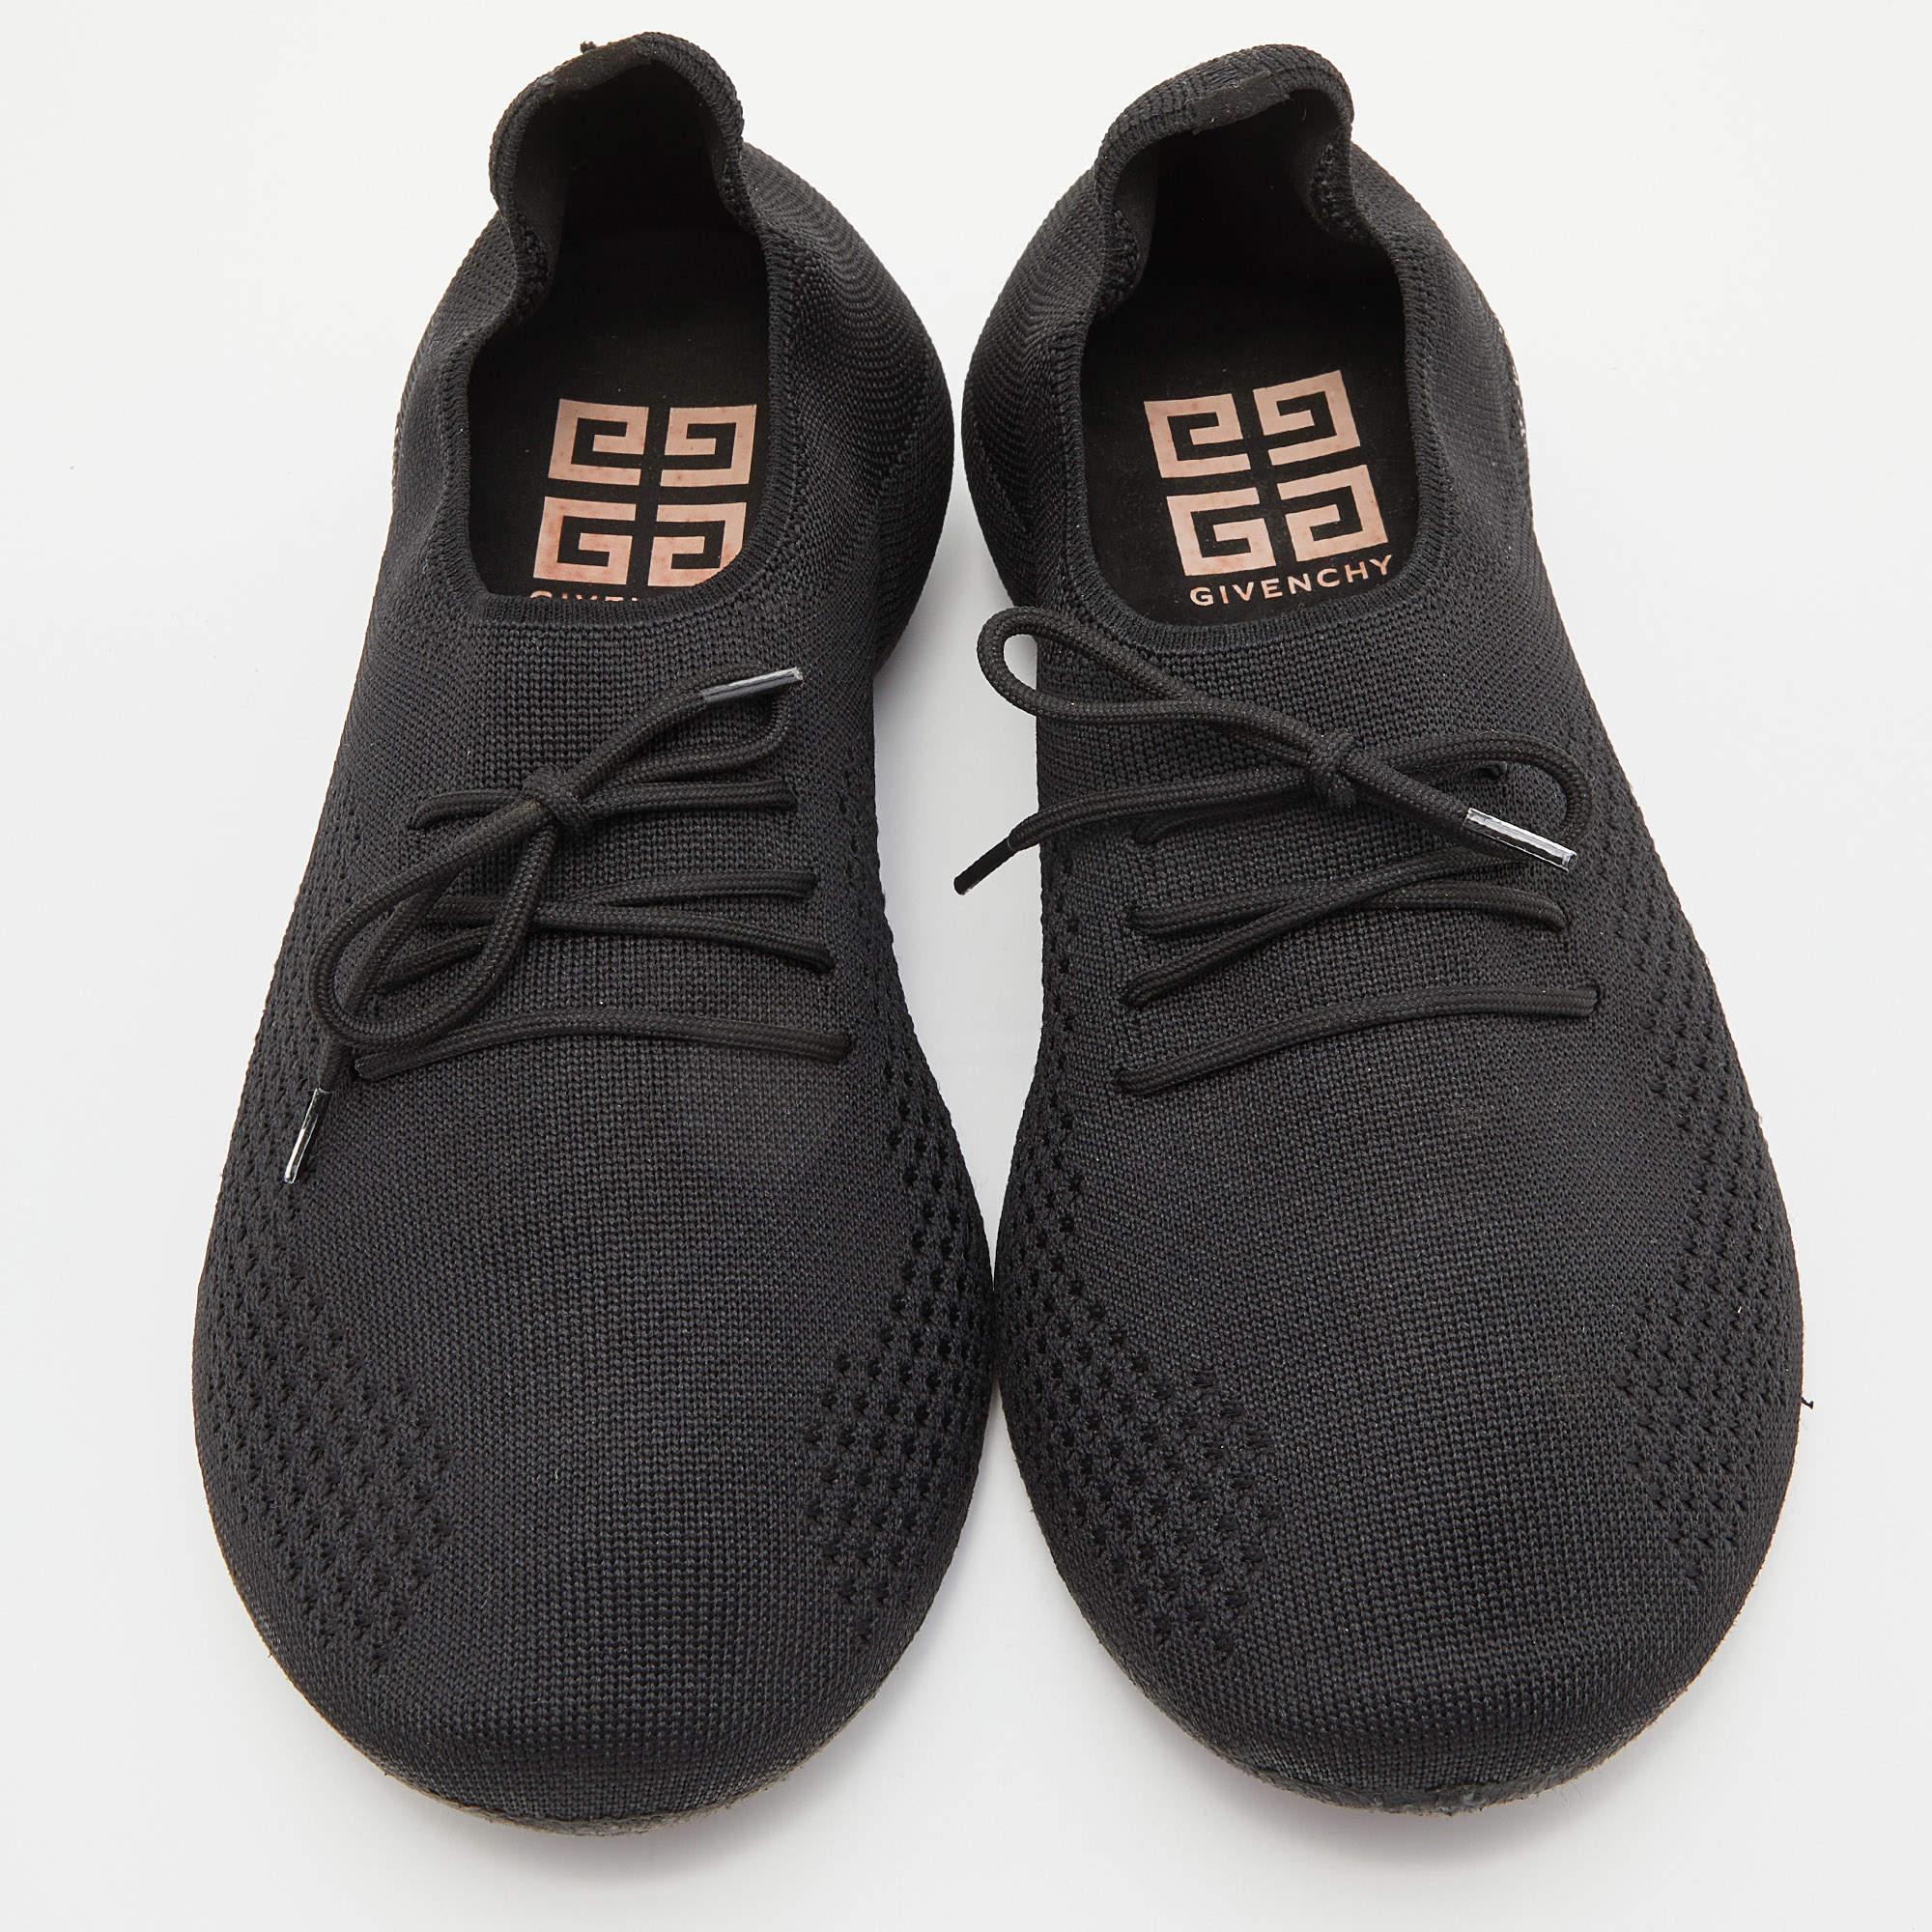 The Givenchy Knit TK-360 sneakers are a stylish and comfortable footwear option. Crafted with precision, they feature a stretchable black knit upper that adapts to the foot's shape, providing a snug fit. These sneakers boast a contemporary design